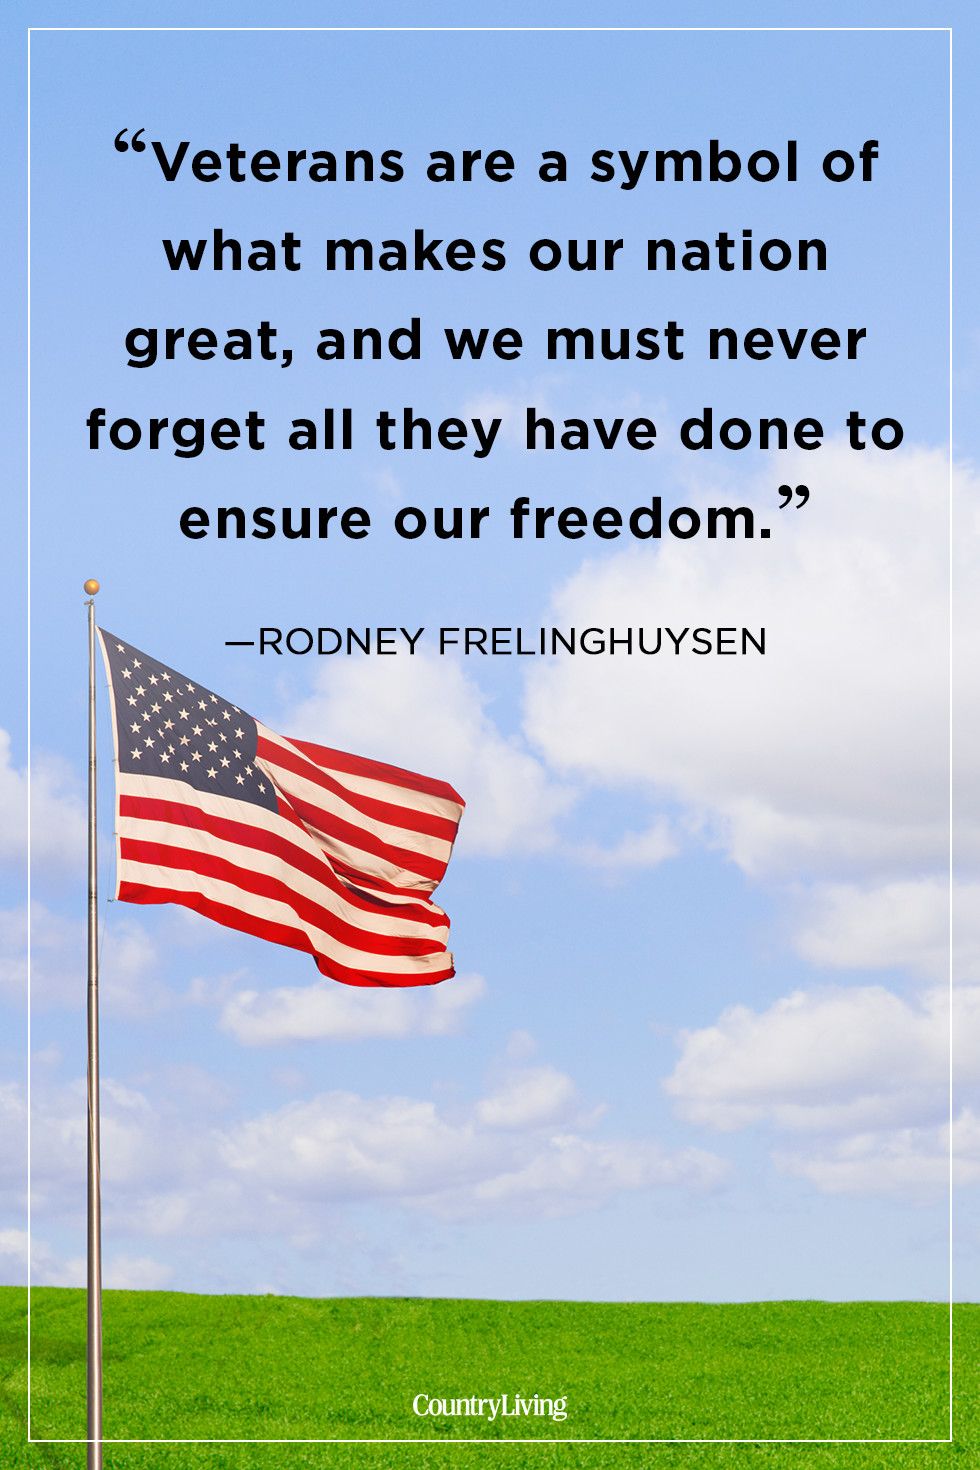 veterans are a symbol of what makes our nation great and we must never forget all they have done to ensure our freedom. rodney frelinghuysen